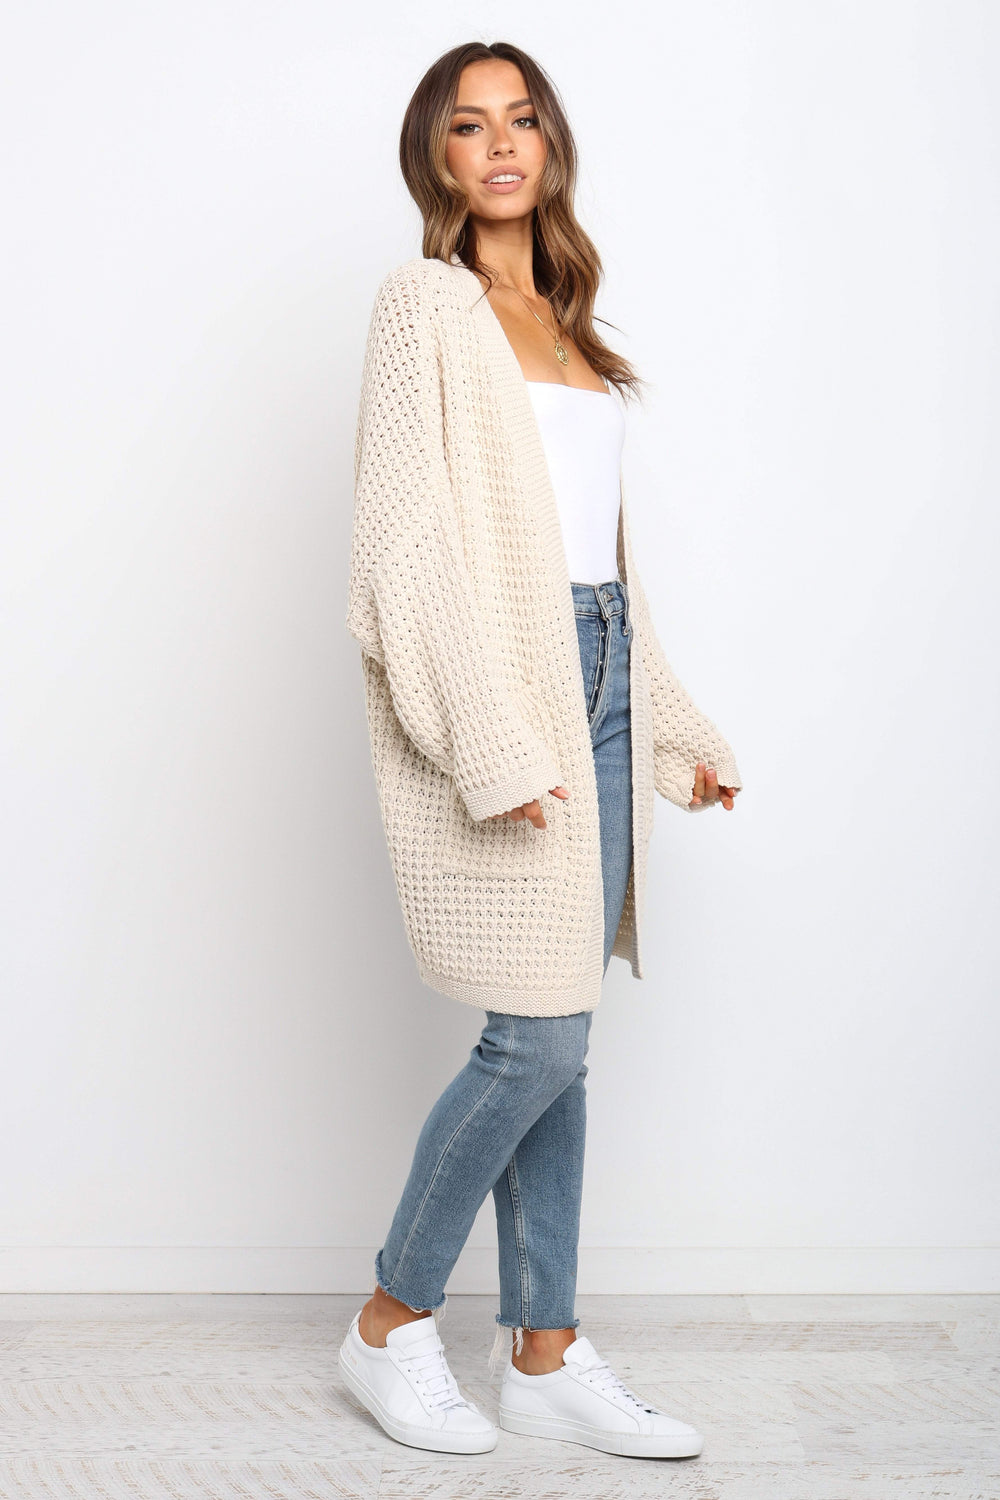 Petal and Pup USA OUTERWEAR Leyonie Cardigan - Cream M/L